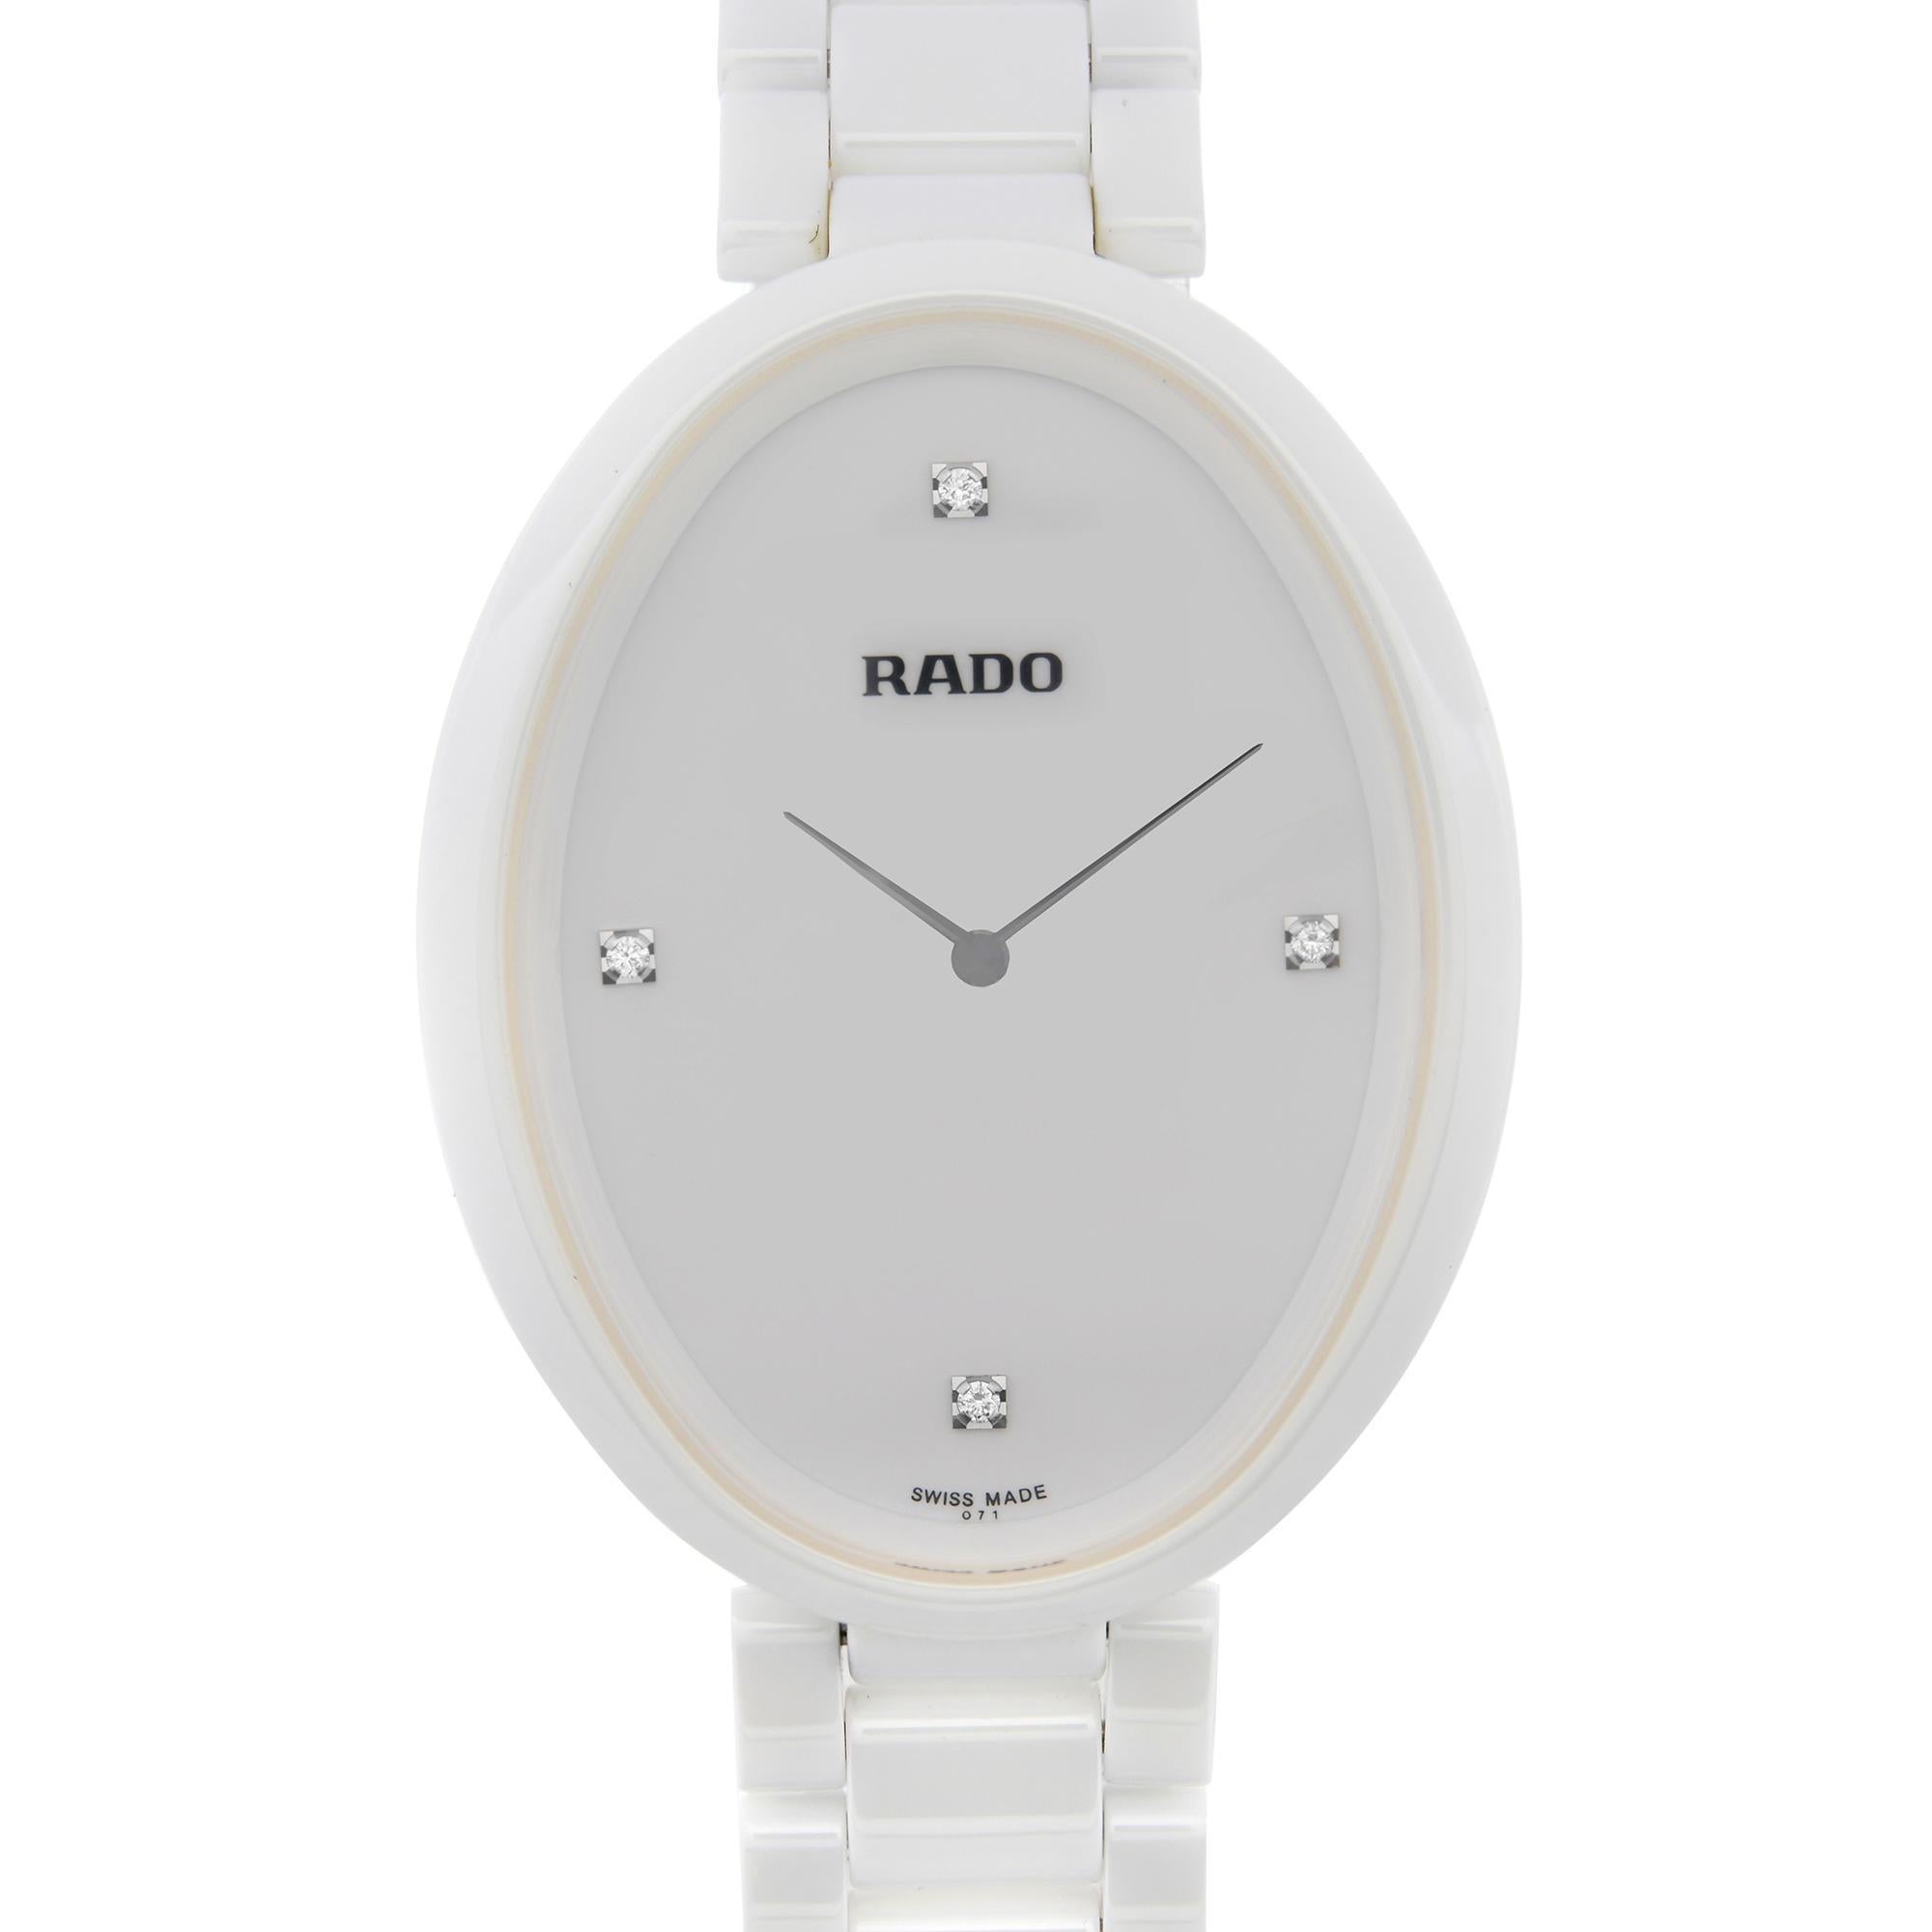 Unworn Rado Esenza Ceramic Touch Quartz Watch R53092712. This Ladies Timepiece is Powered by a Quartz (Battery) Movement and Features: White Ceramic Case and Bracelet, Fixed White Ceramic Bezel, White Dial with Silver-Tone Hands And Diamond Hour